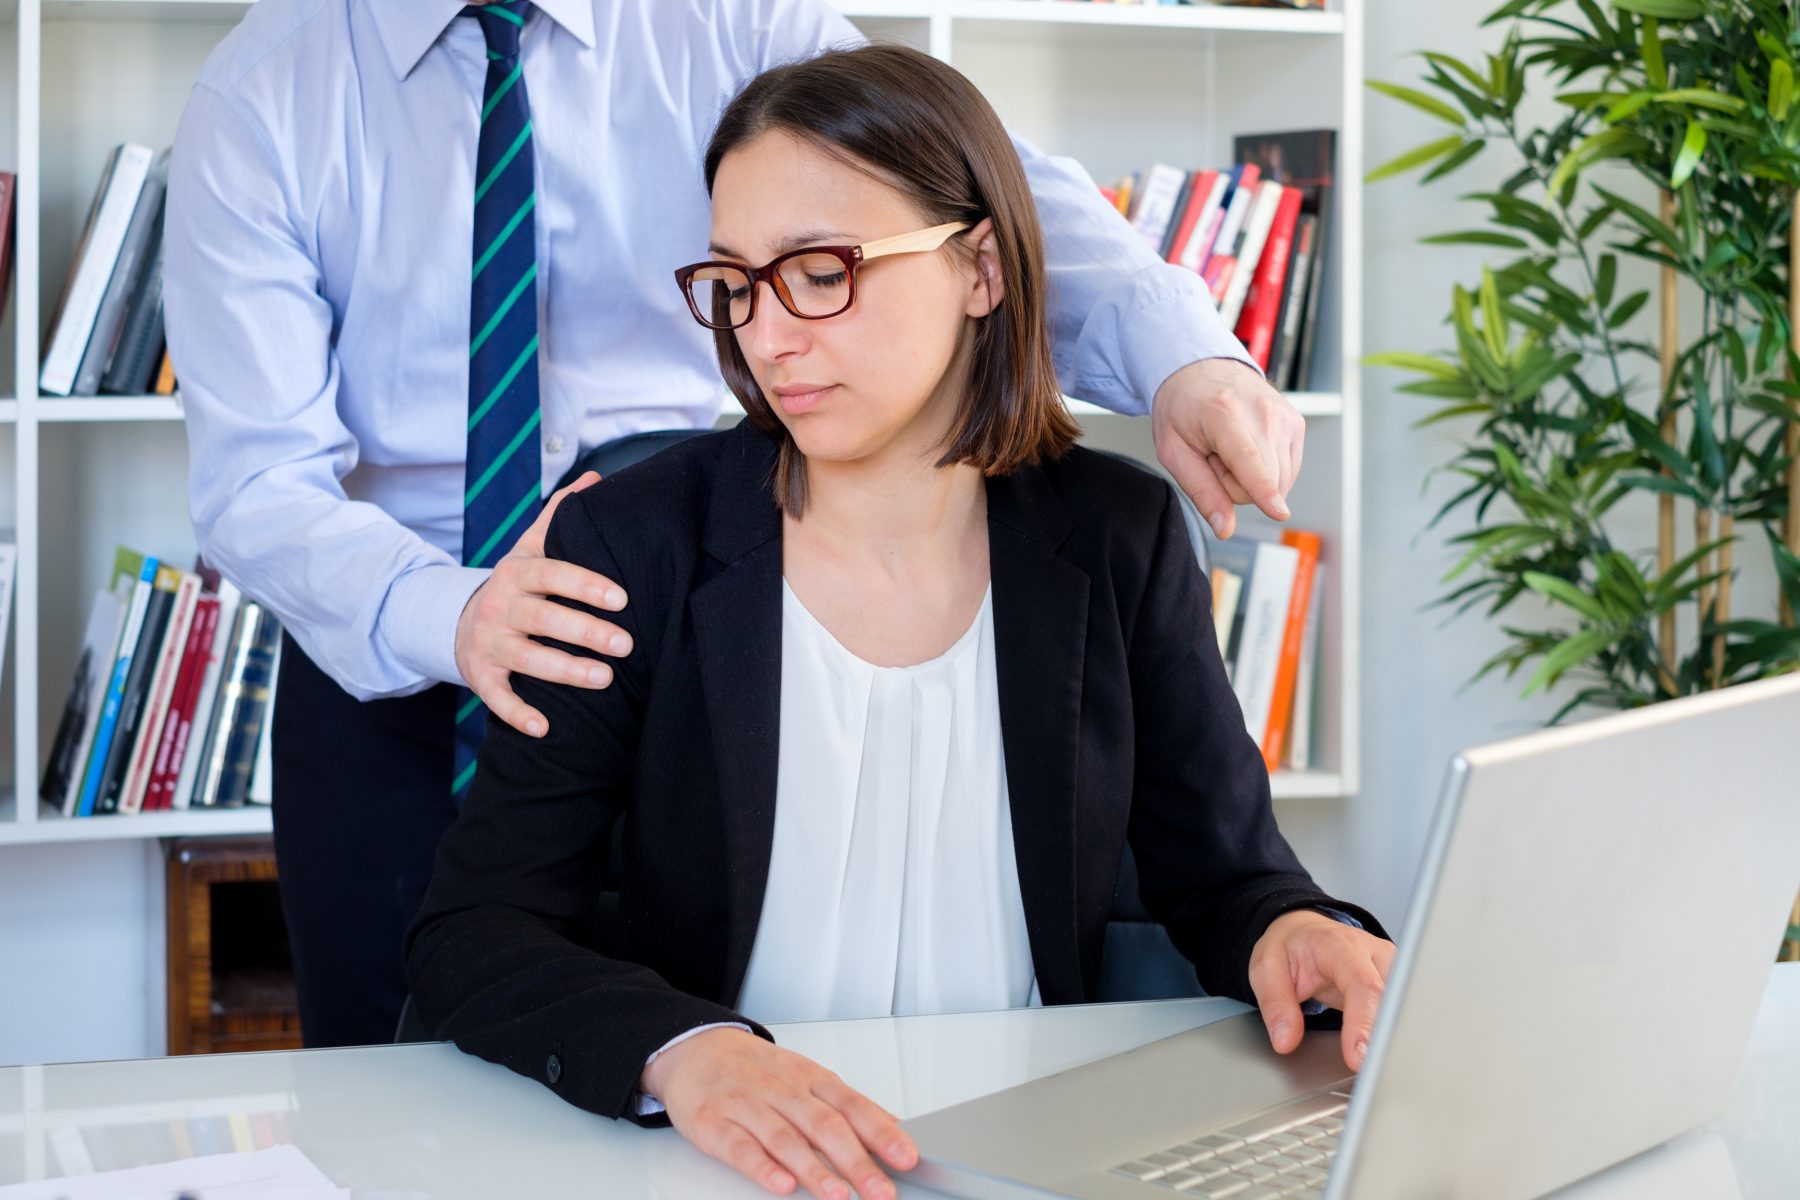 How to Handle Sexual Harassment in the Workplace